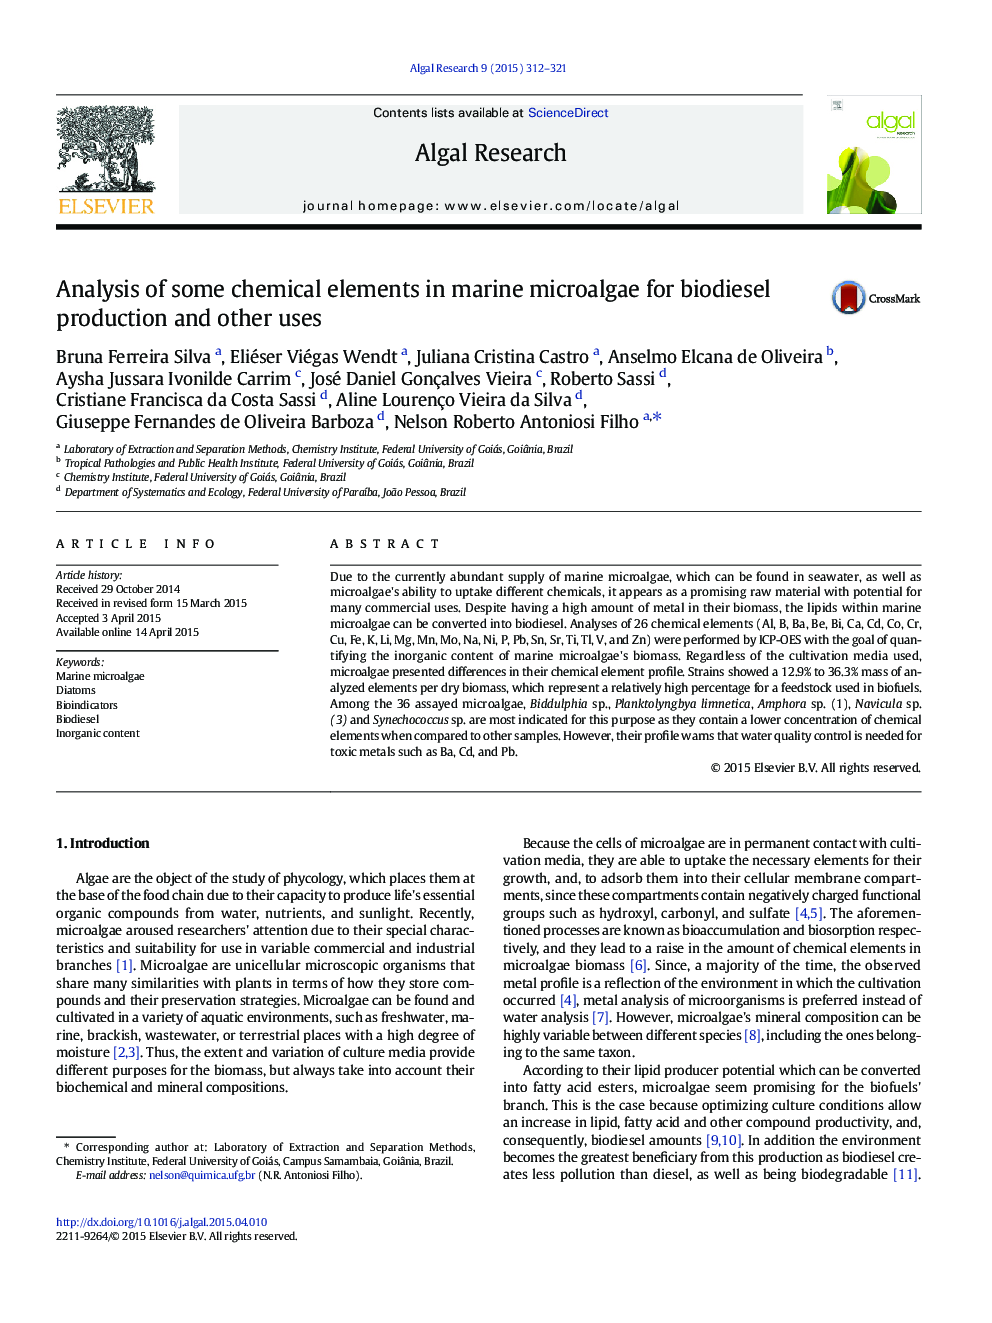 Analysis of some chemical elements in marine microalgae for biodiesel production and other uses